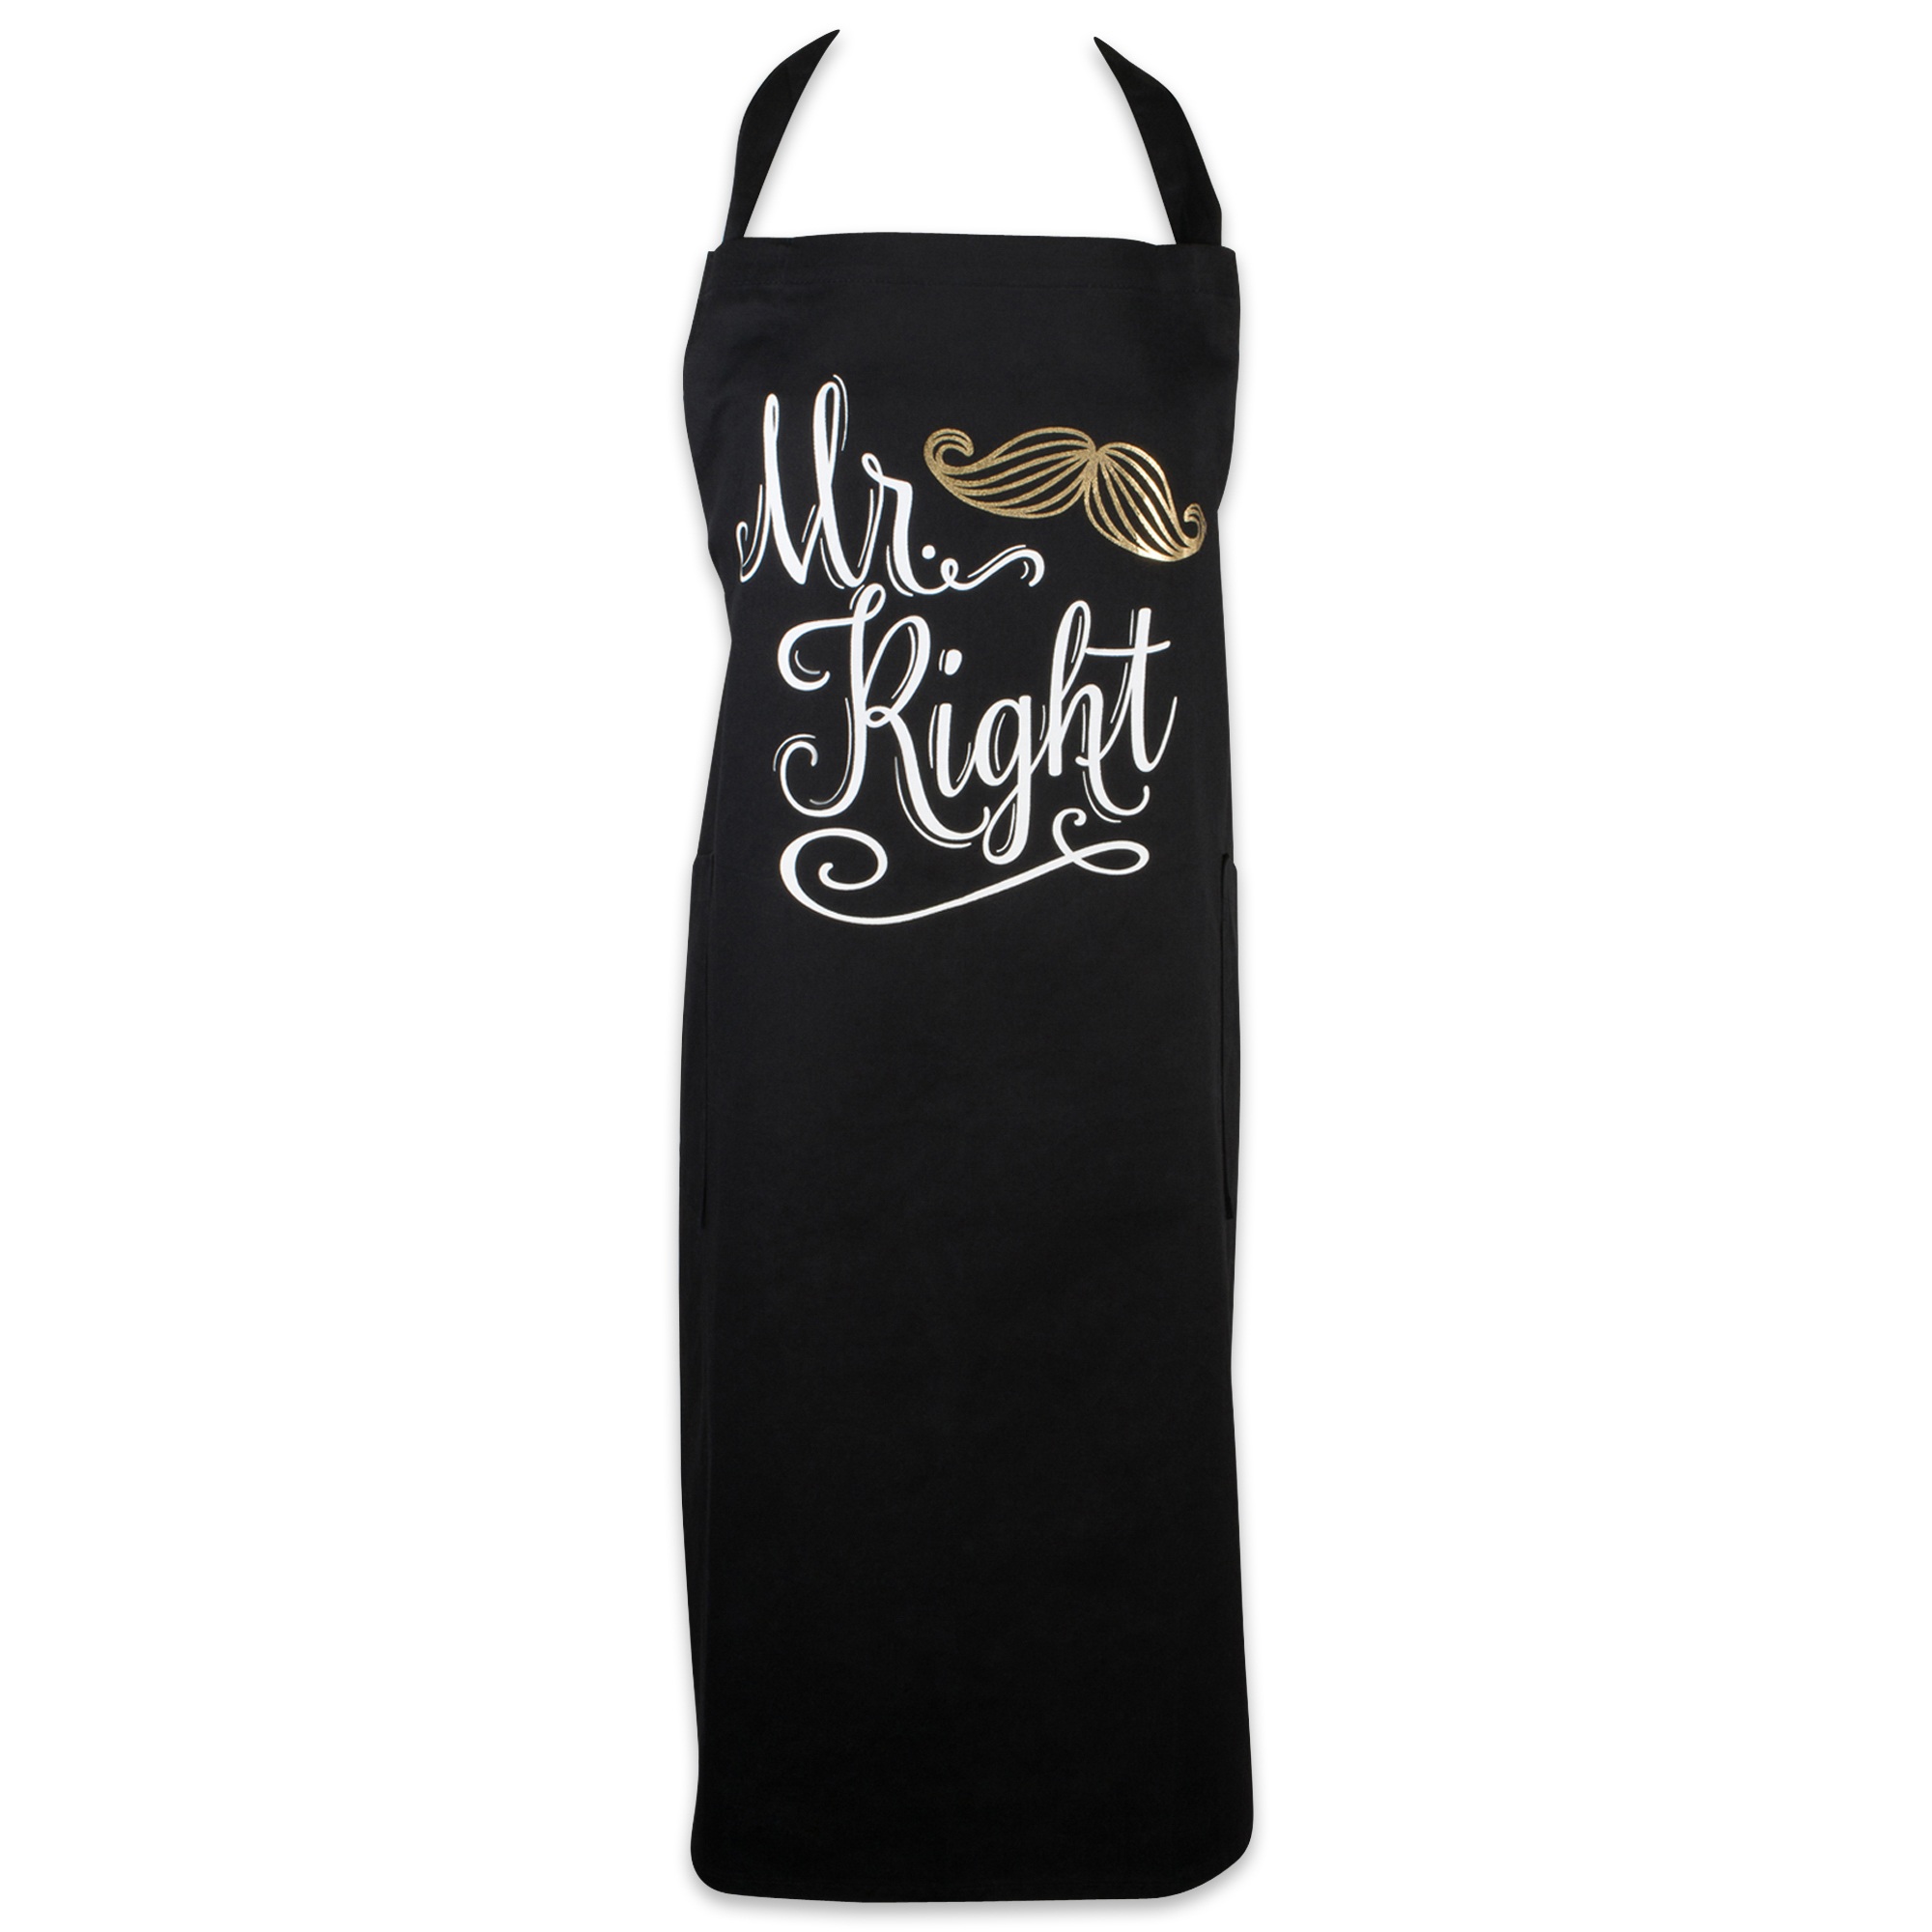 DII CAMZ38743 Cotton Mr. Right Men Apron with Pocket and Extra Long Ties Perfect for Holiday, Housewarming and Wedding Gift, 35 